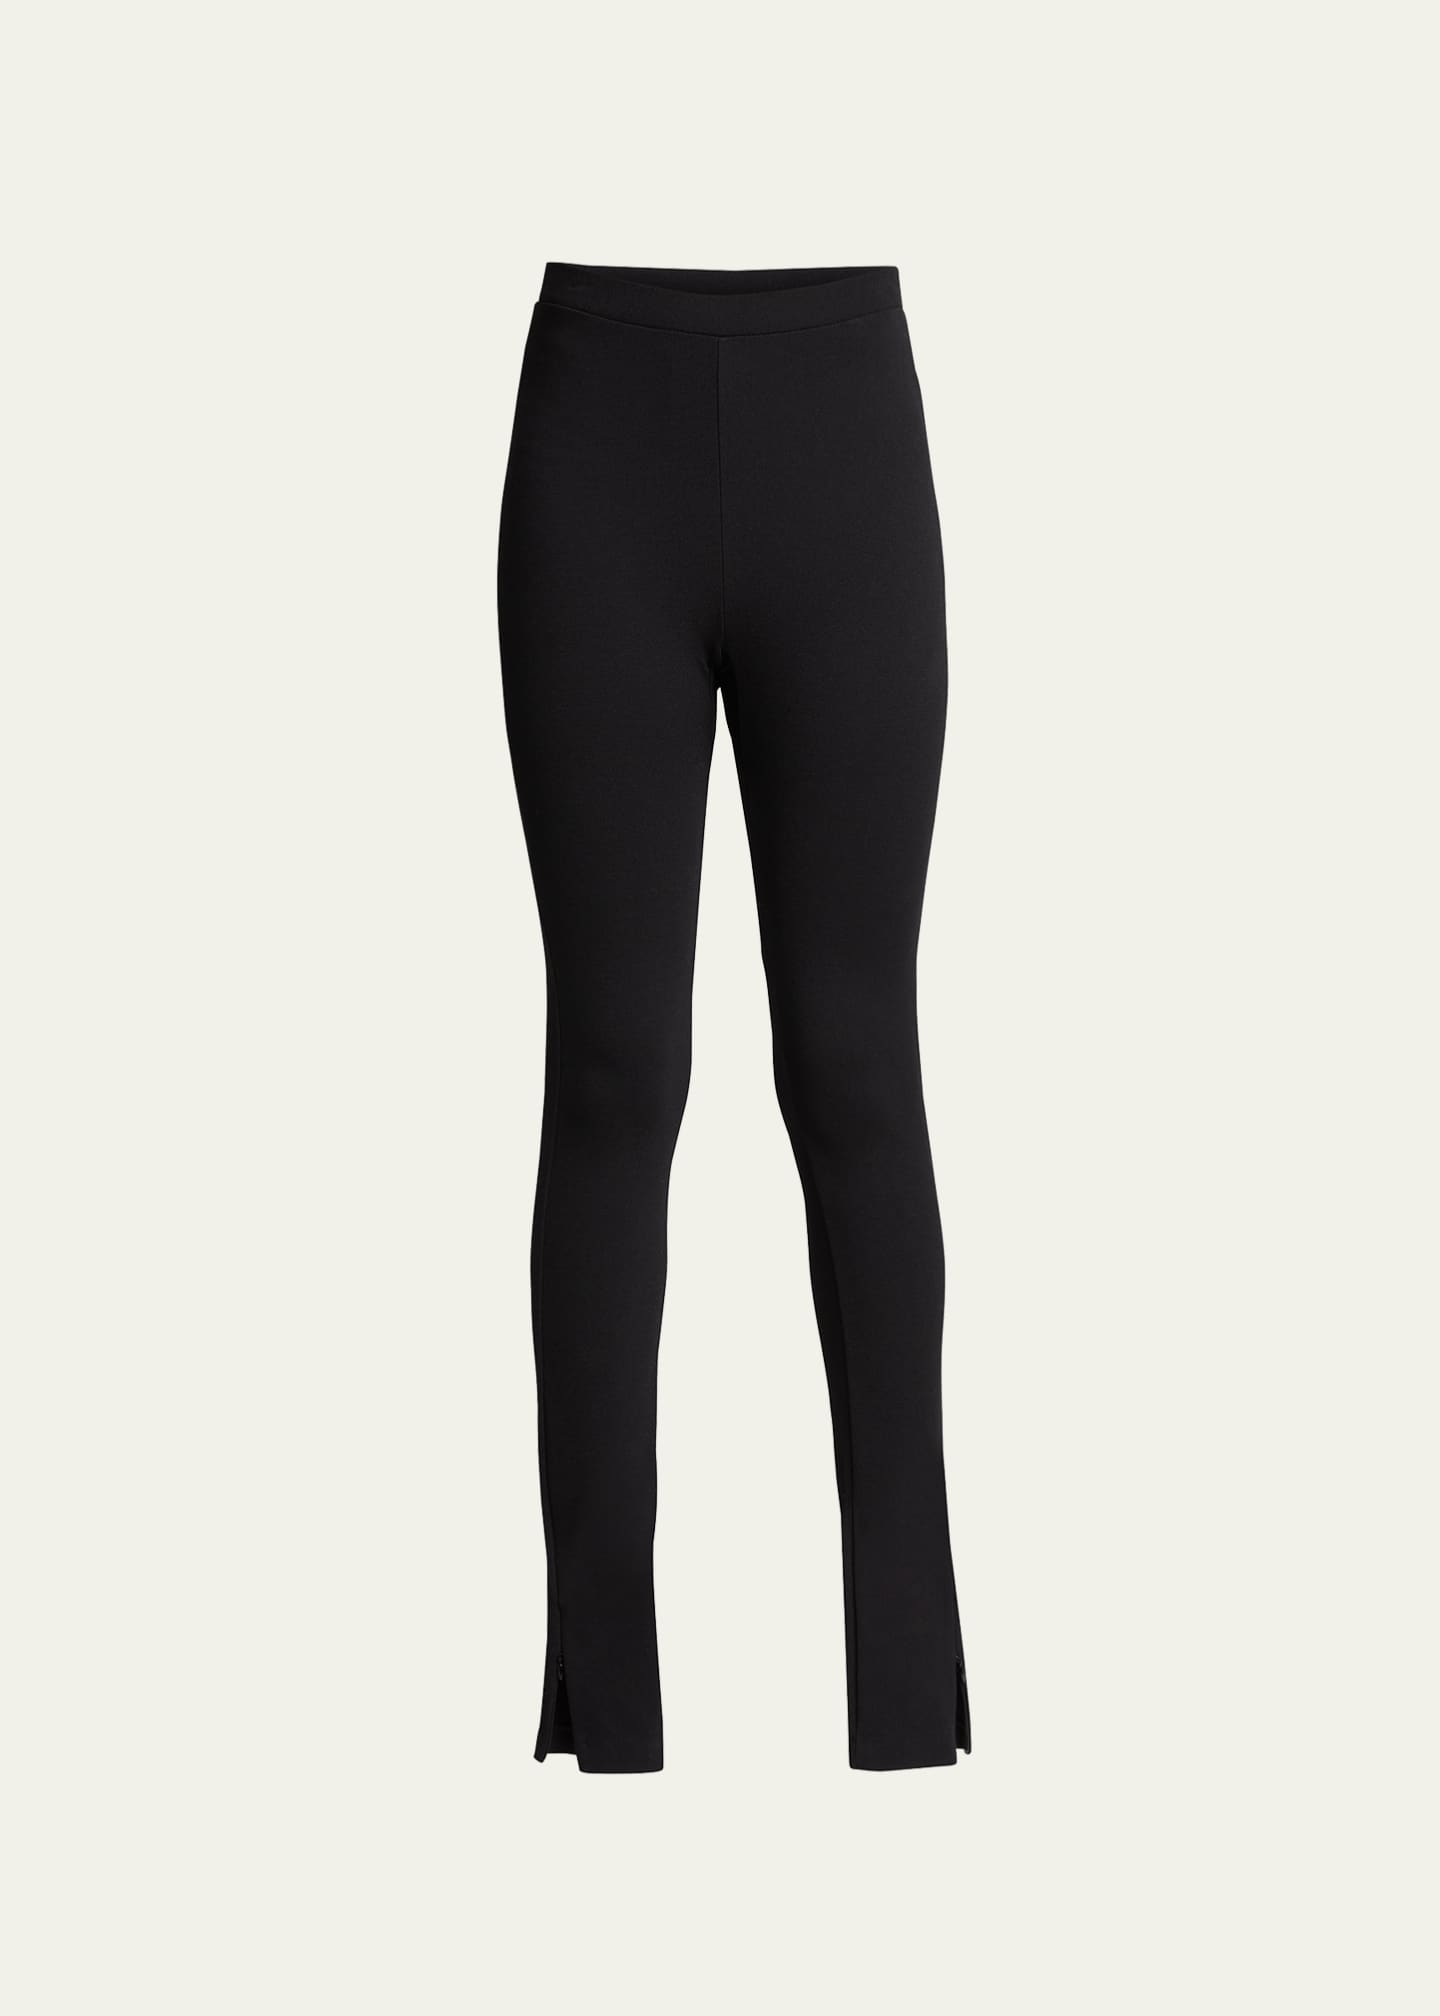 Women's Leggings With Zip by Toteme